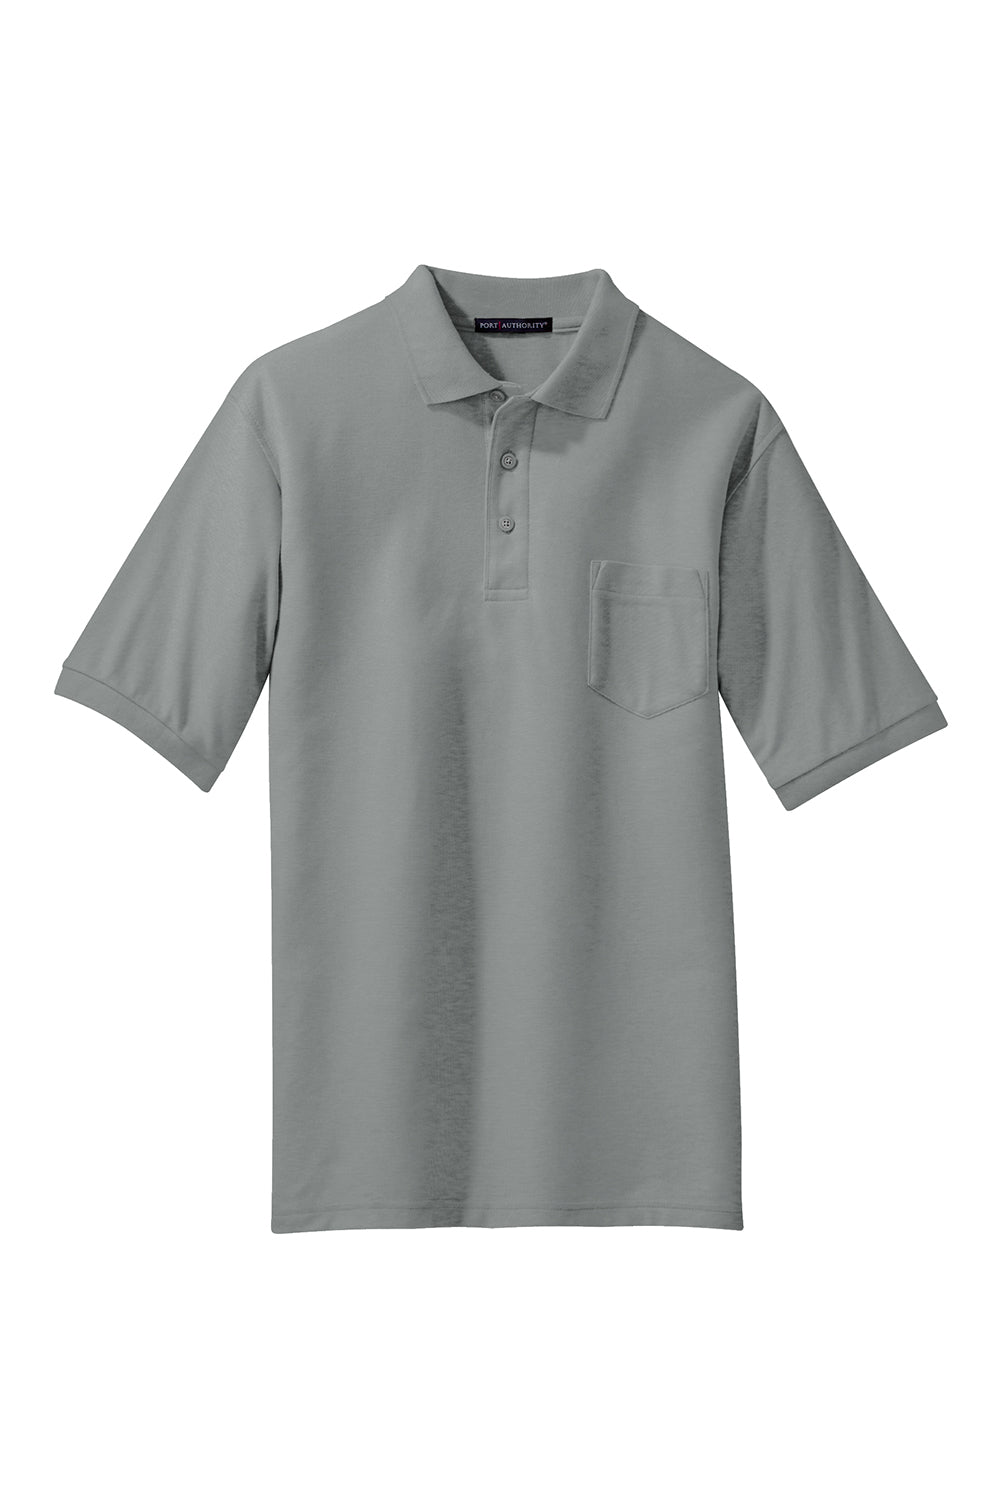 Port Authority K500P Mens Silk Touch Wrinkle Resistant Short Sleeve Polo Shirt w/ Pocket Cool Grey Flat Front